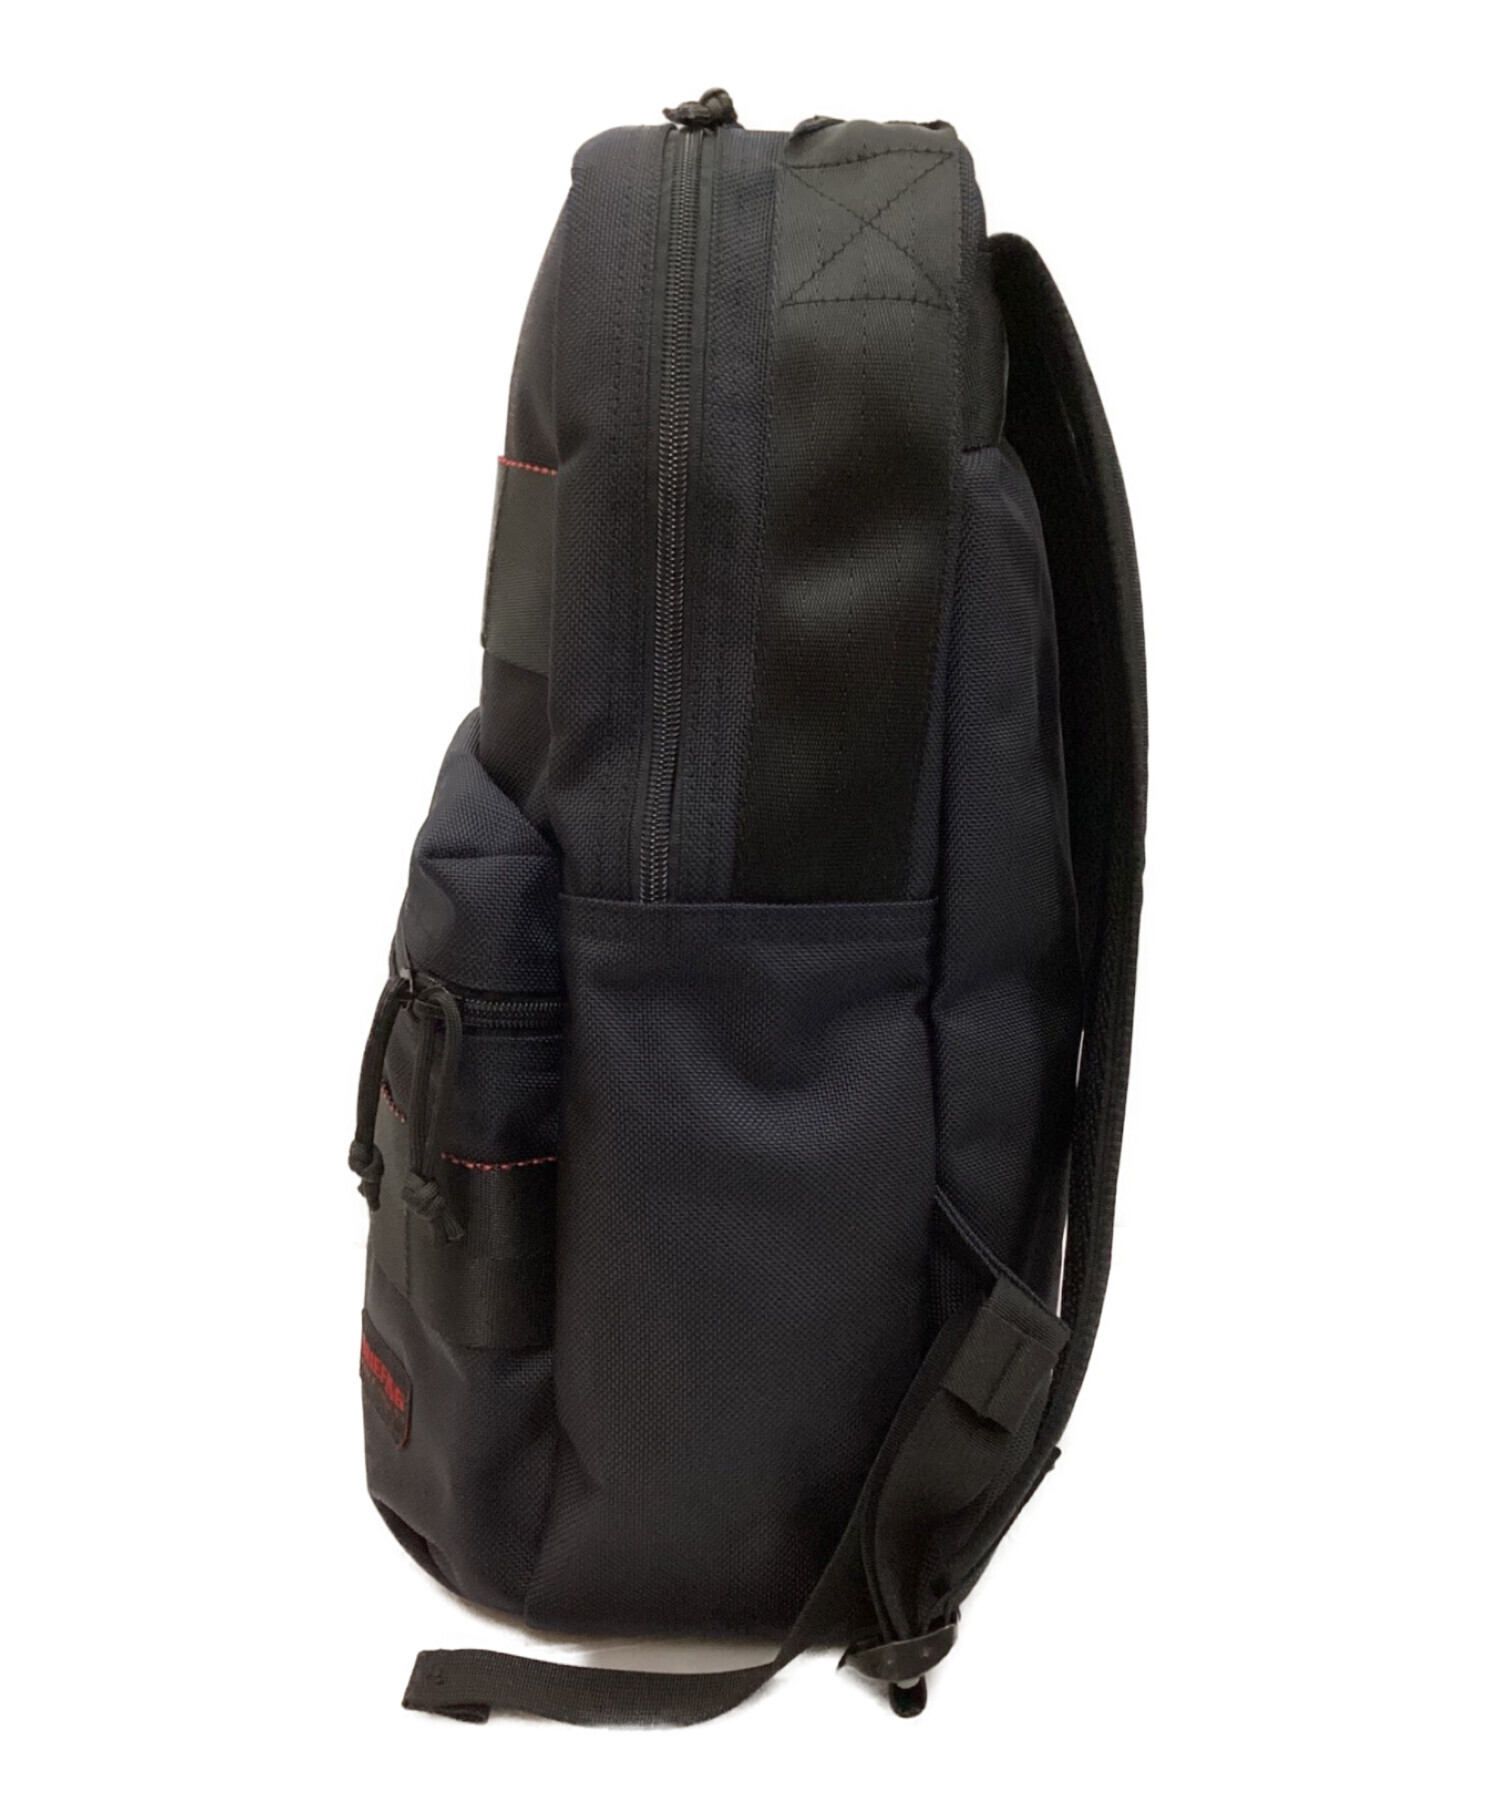 BRIEFING×EDIFICE 別注 attack DAYPACK - リュック/バックパック